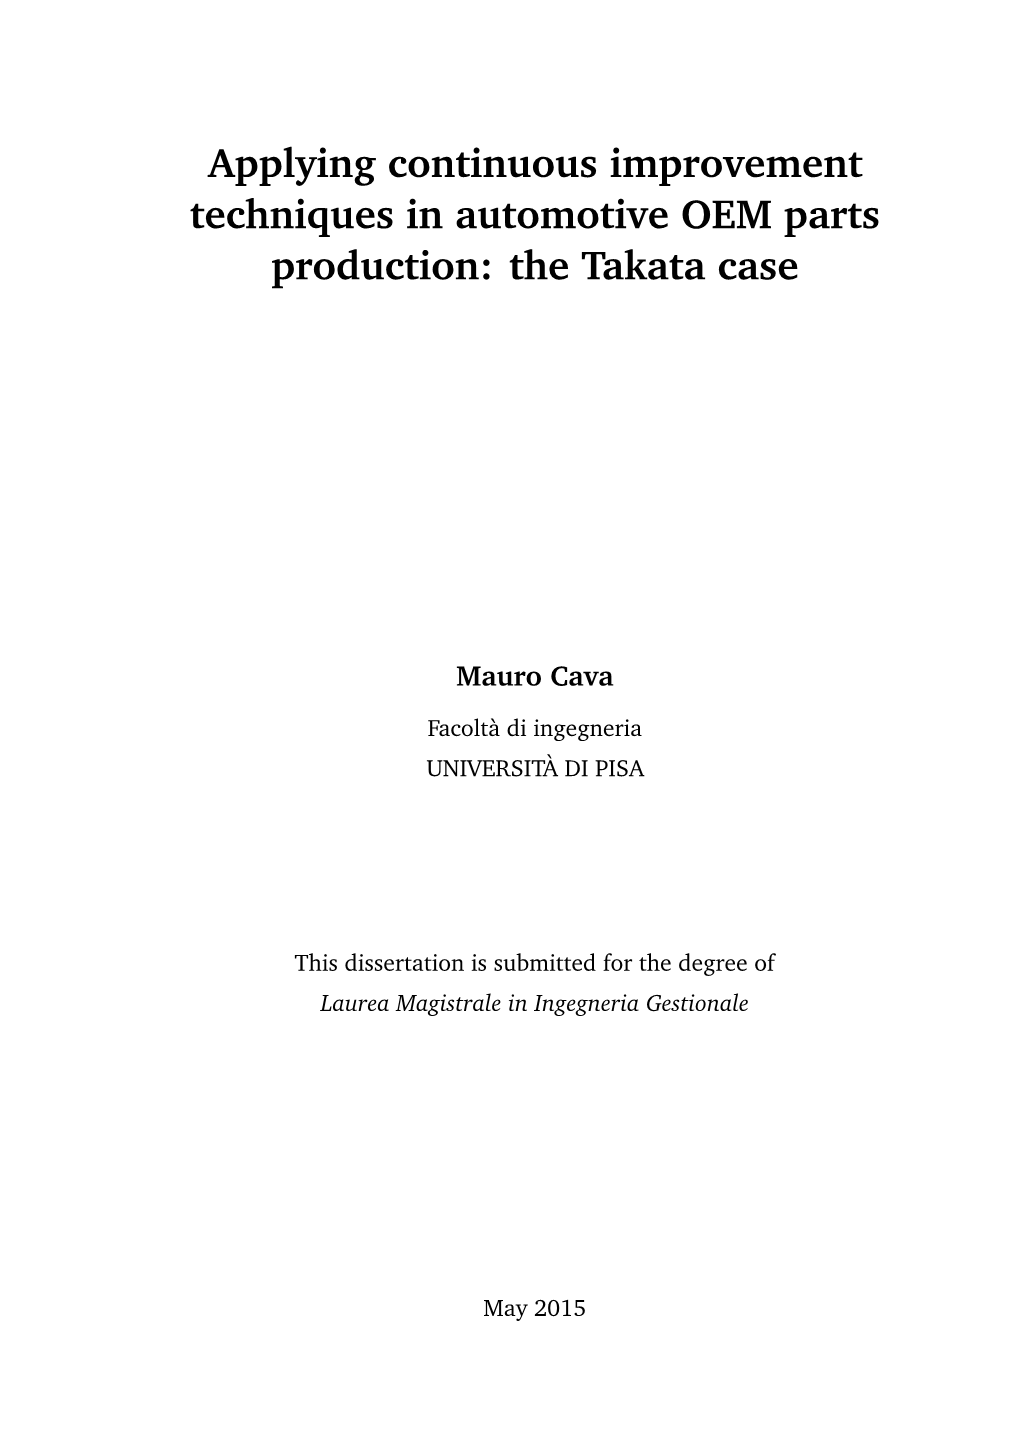 Applying Continuous Improvement Techniques in Automotive OEM Parts Production: the Takata Case